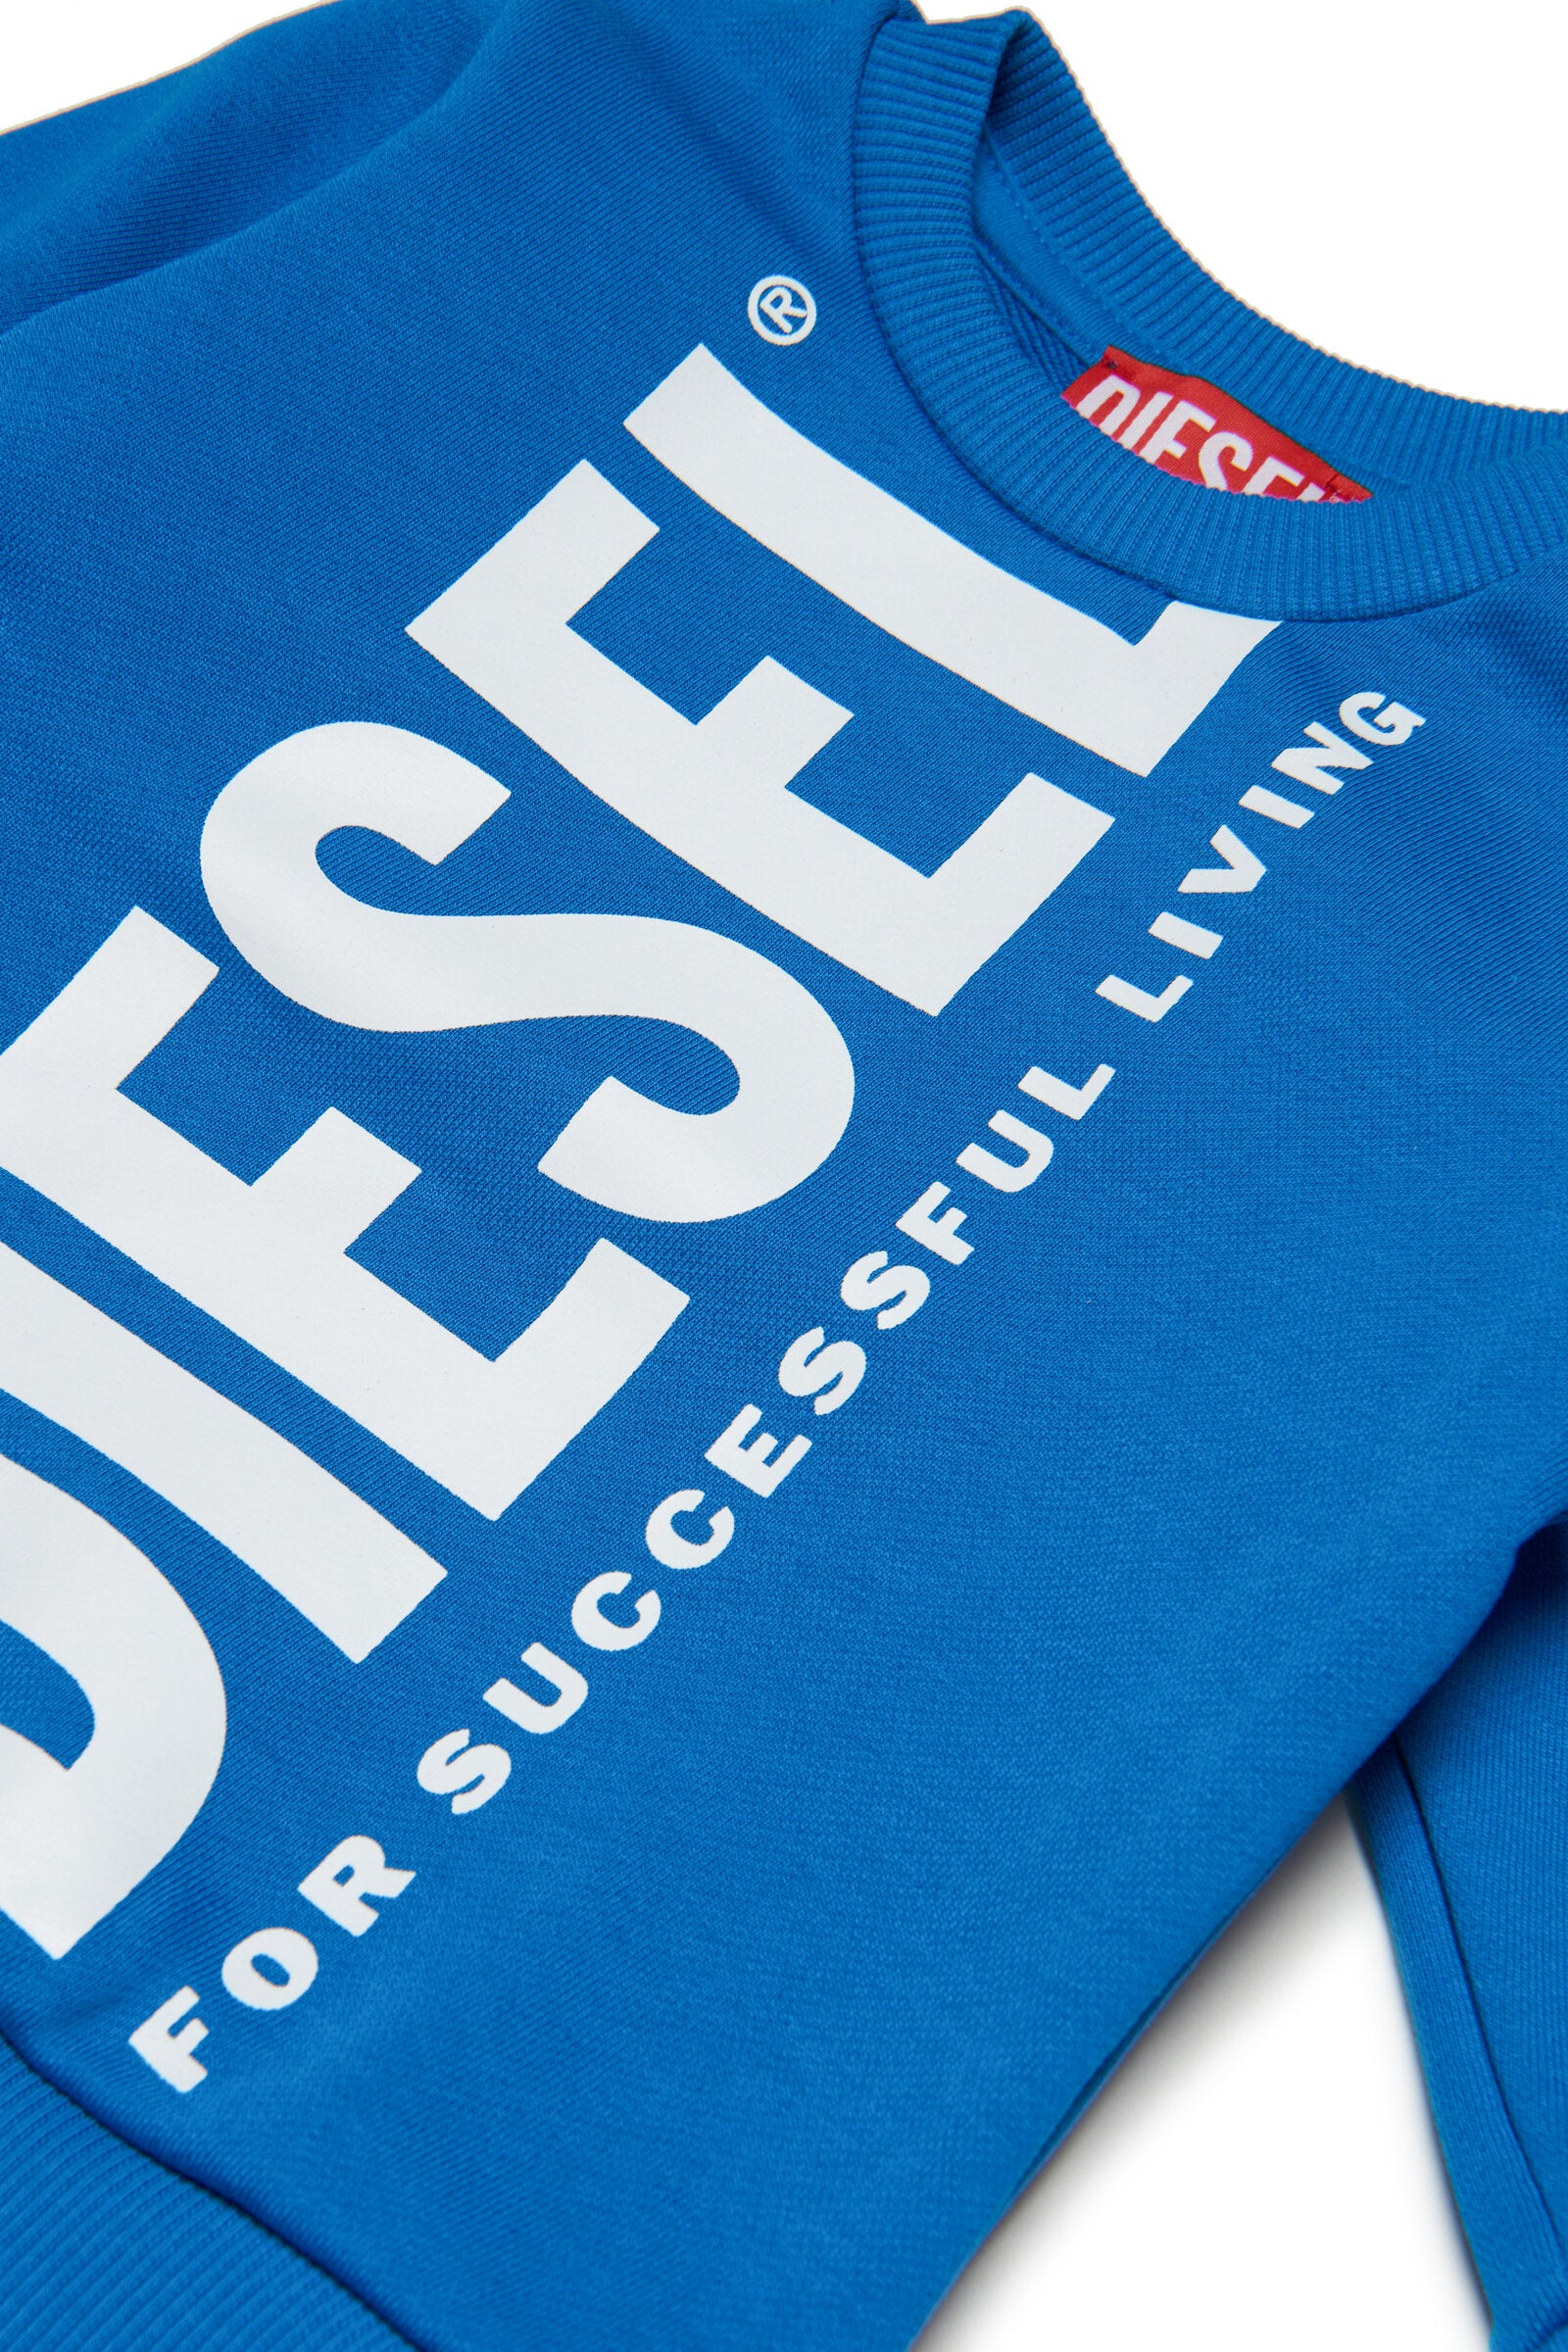 Diesel blue crew-neck cotton sweatshirt with extra-large logo for